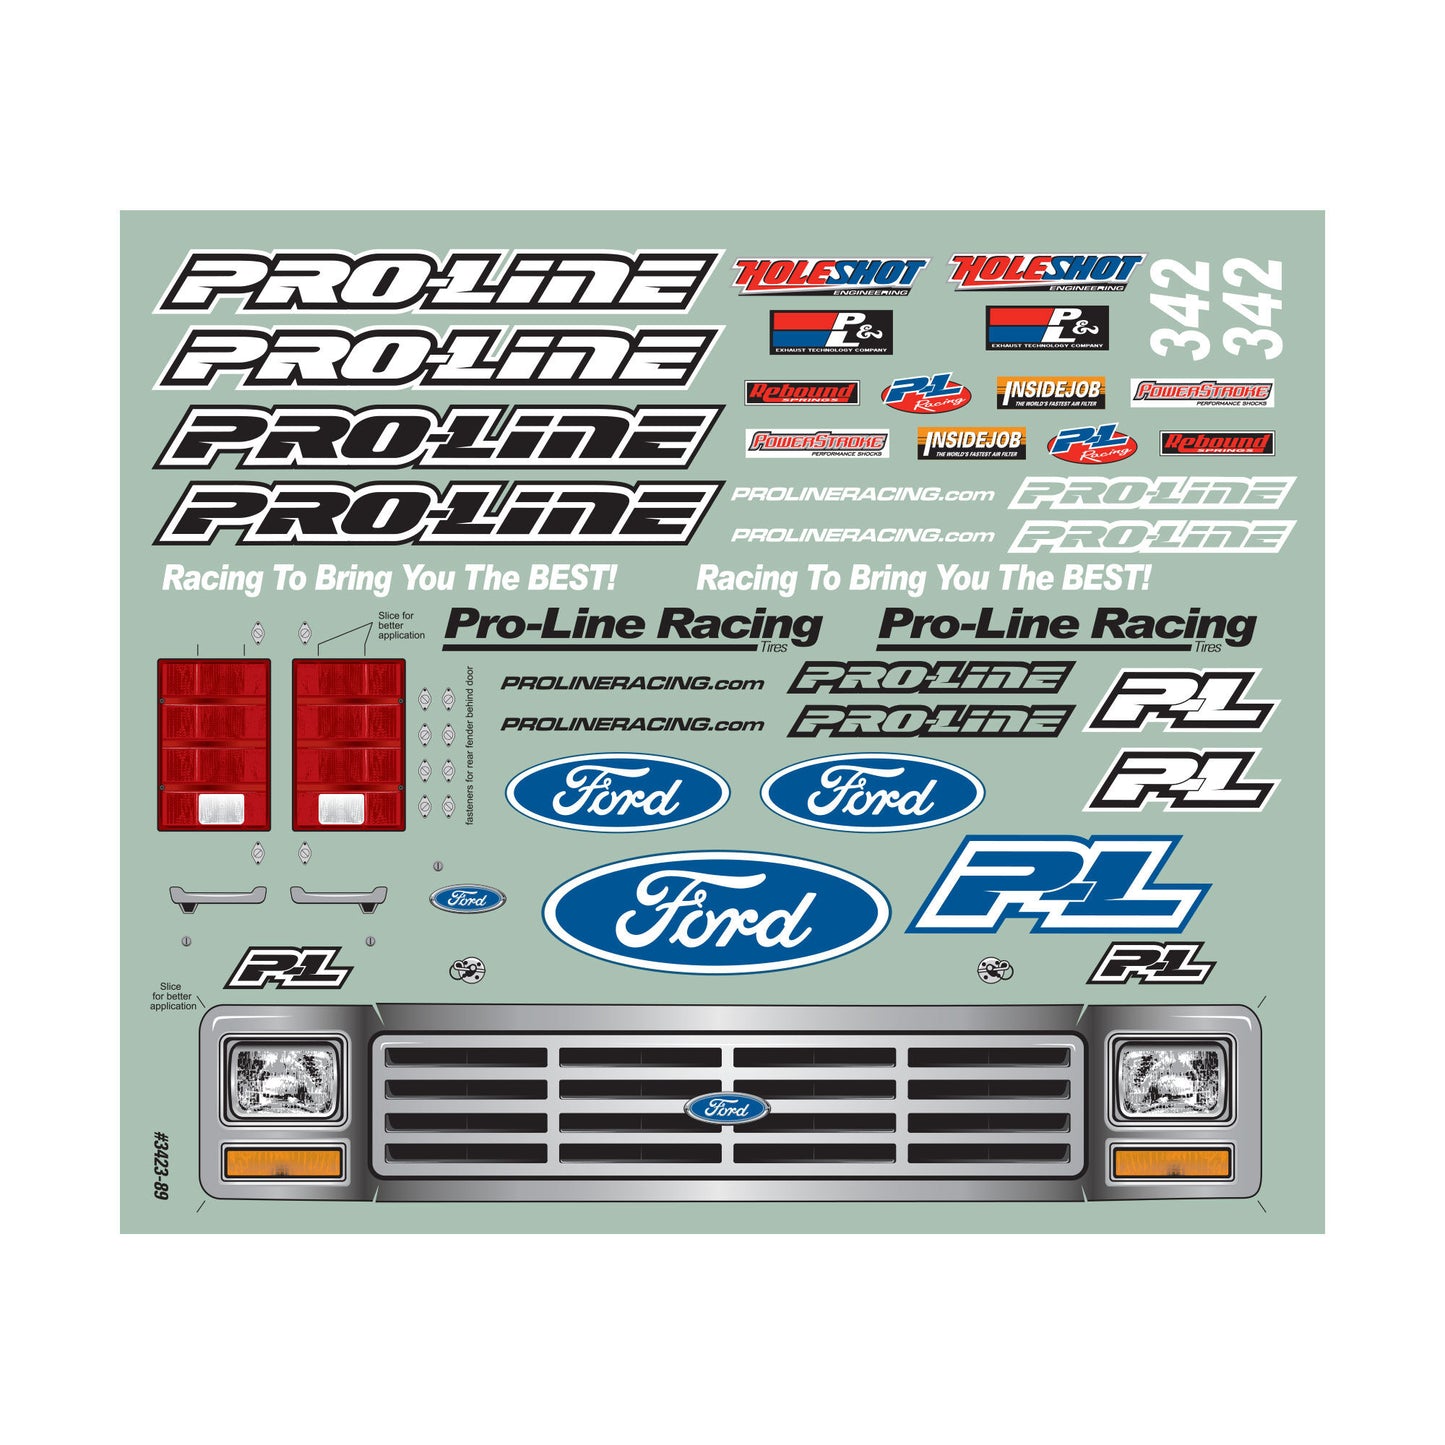 Pro-Line® 1/10 1981 Ford Bronco Clear Body: Short Course